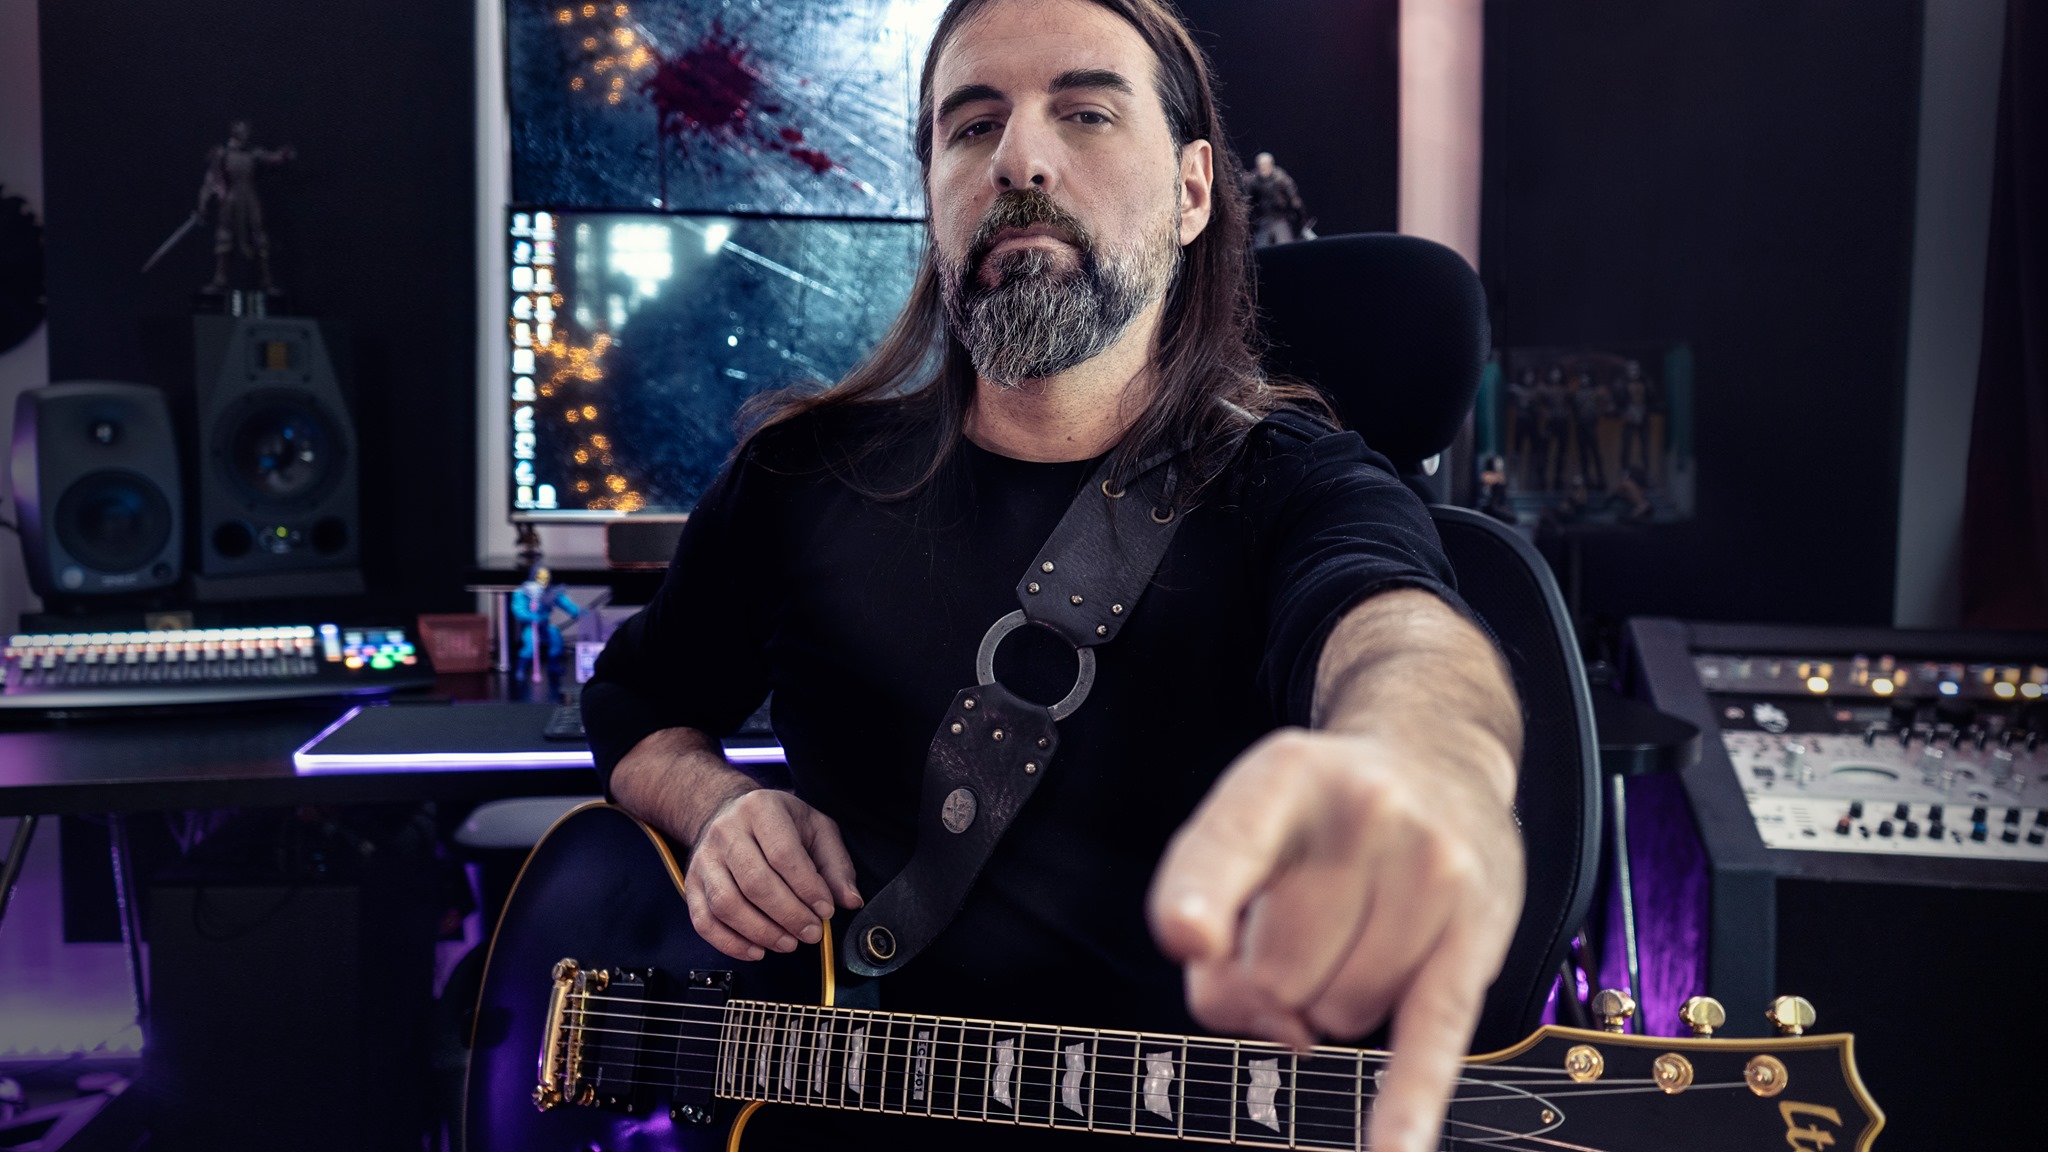 You are currently viewing Sakis Tolis (ROTTING CHRIST): Recording Guitars For His One Man Band Solo Project.